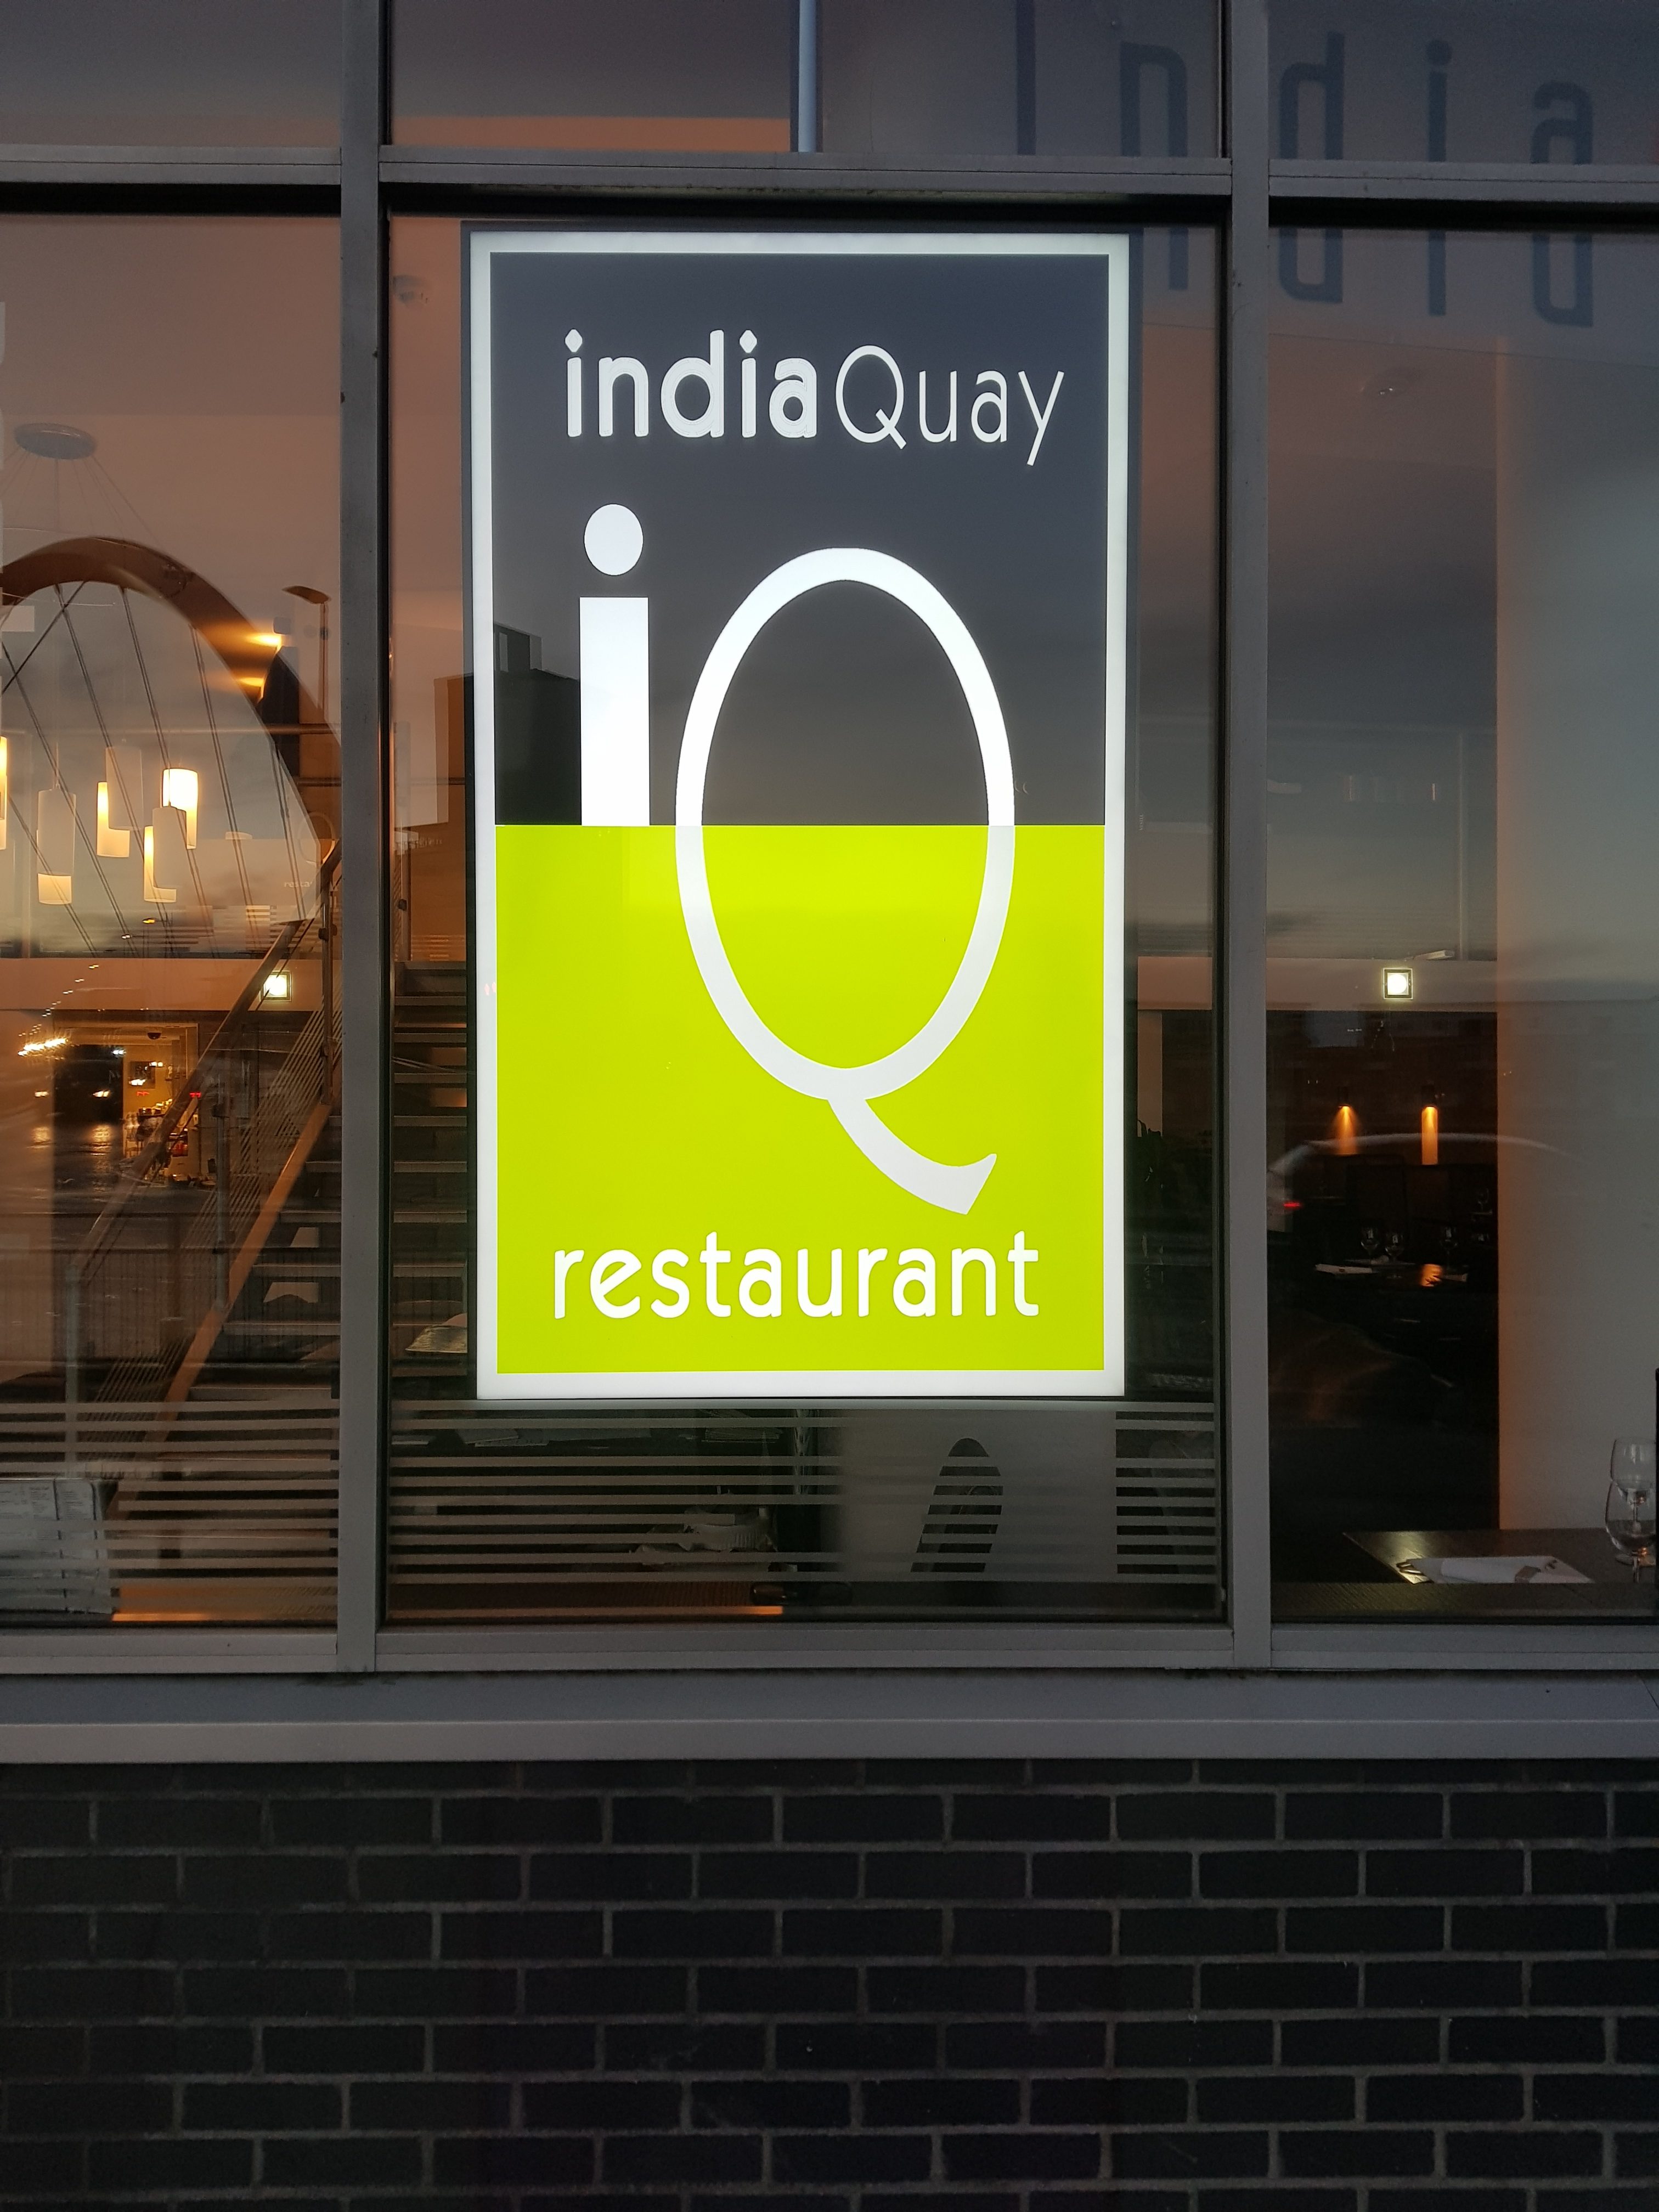 Case Study: India Quay Spices Up Advertising By Going Digital TrouDigital